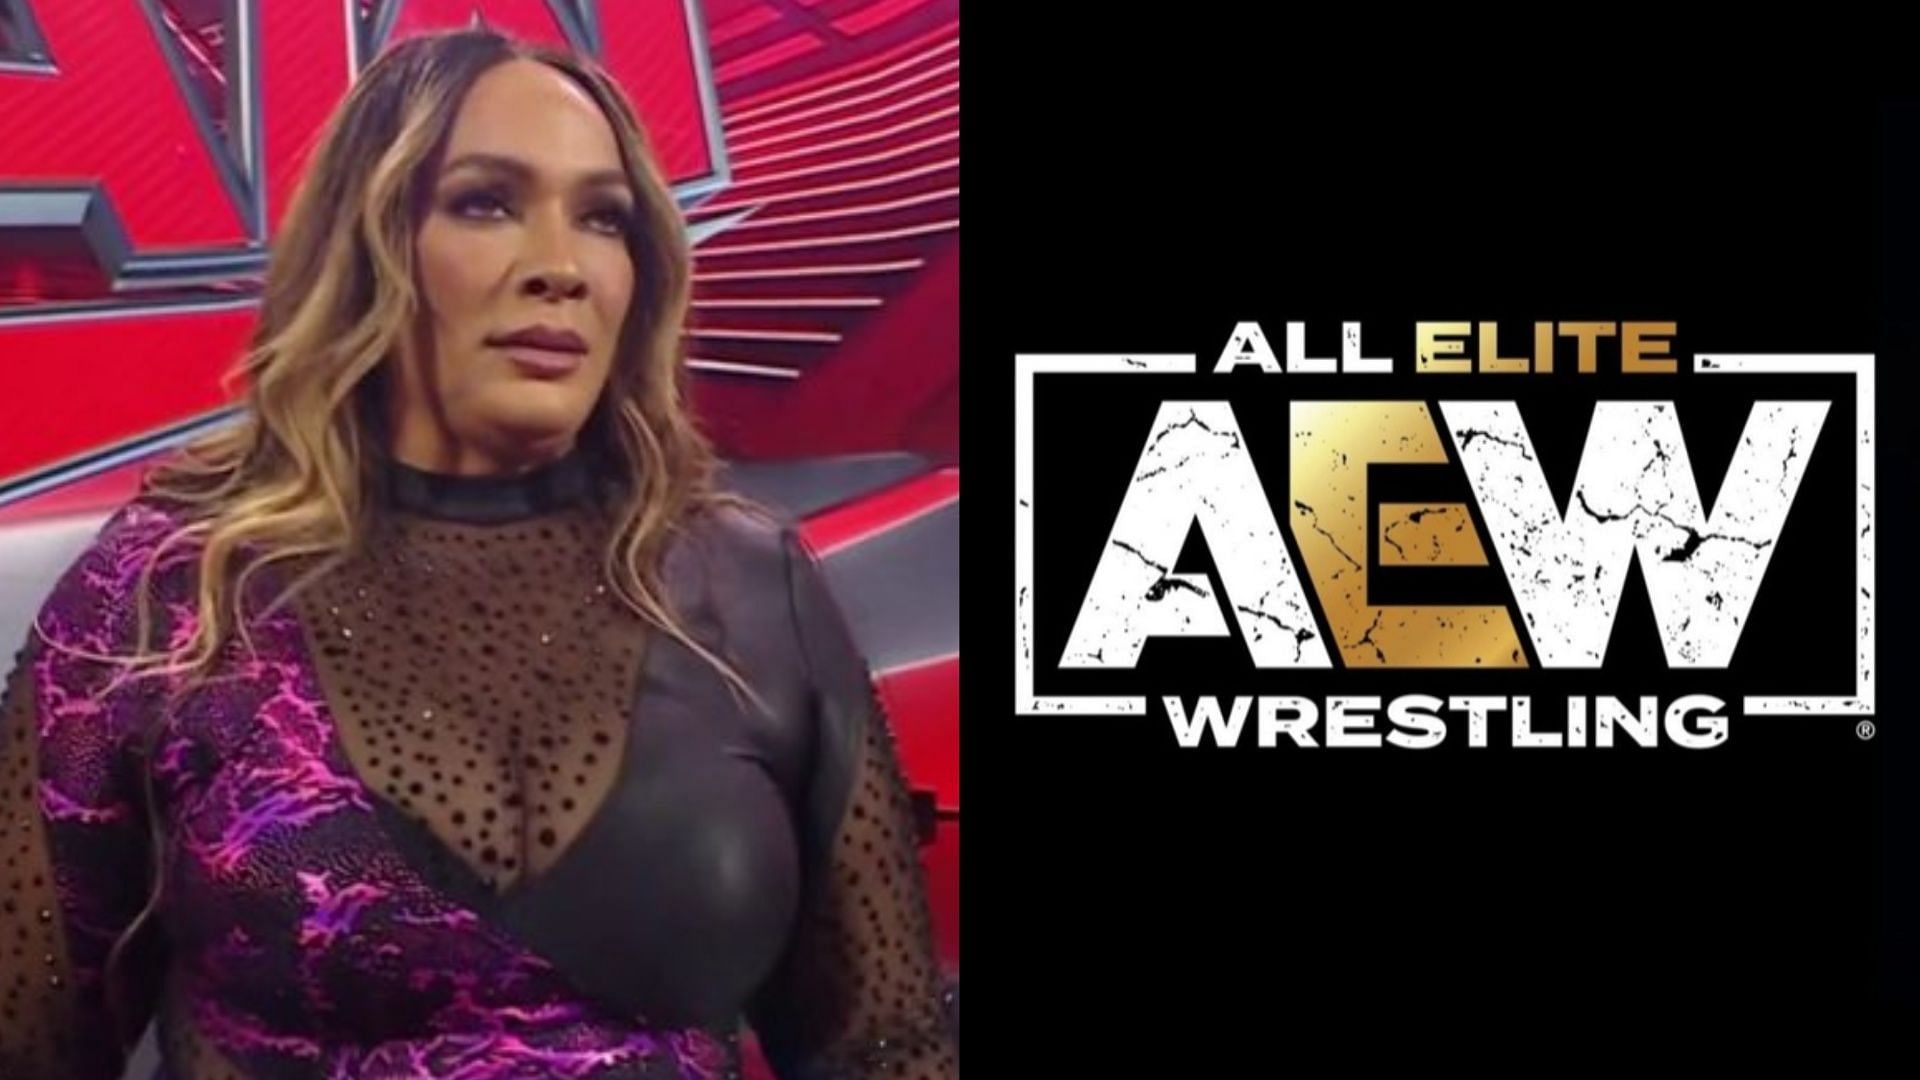 Nia Jax breaks character to send message to AEW star